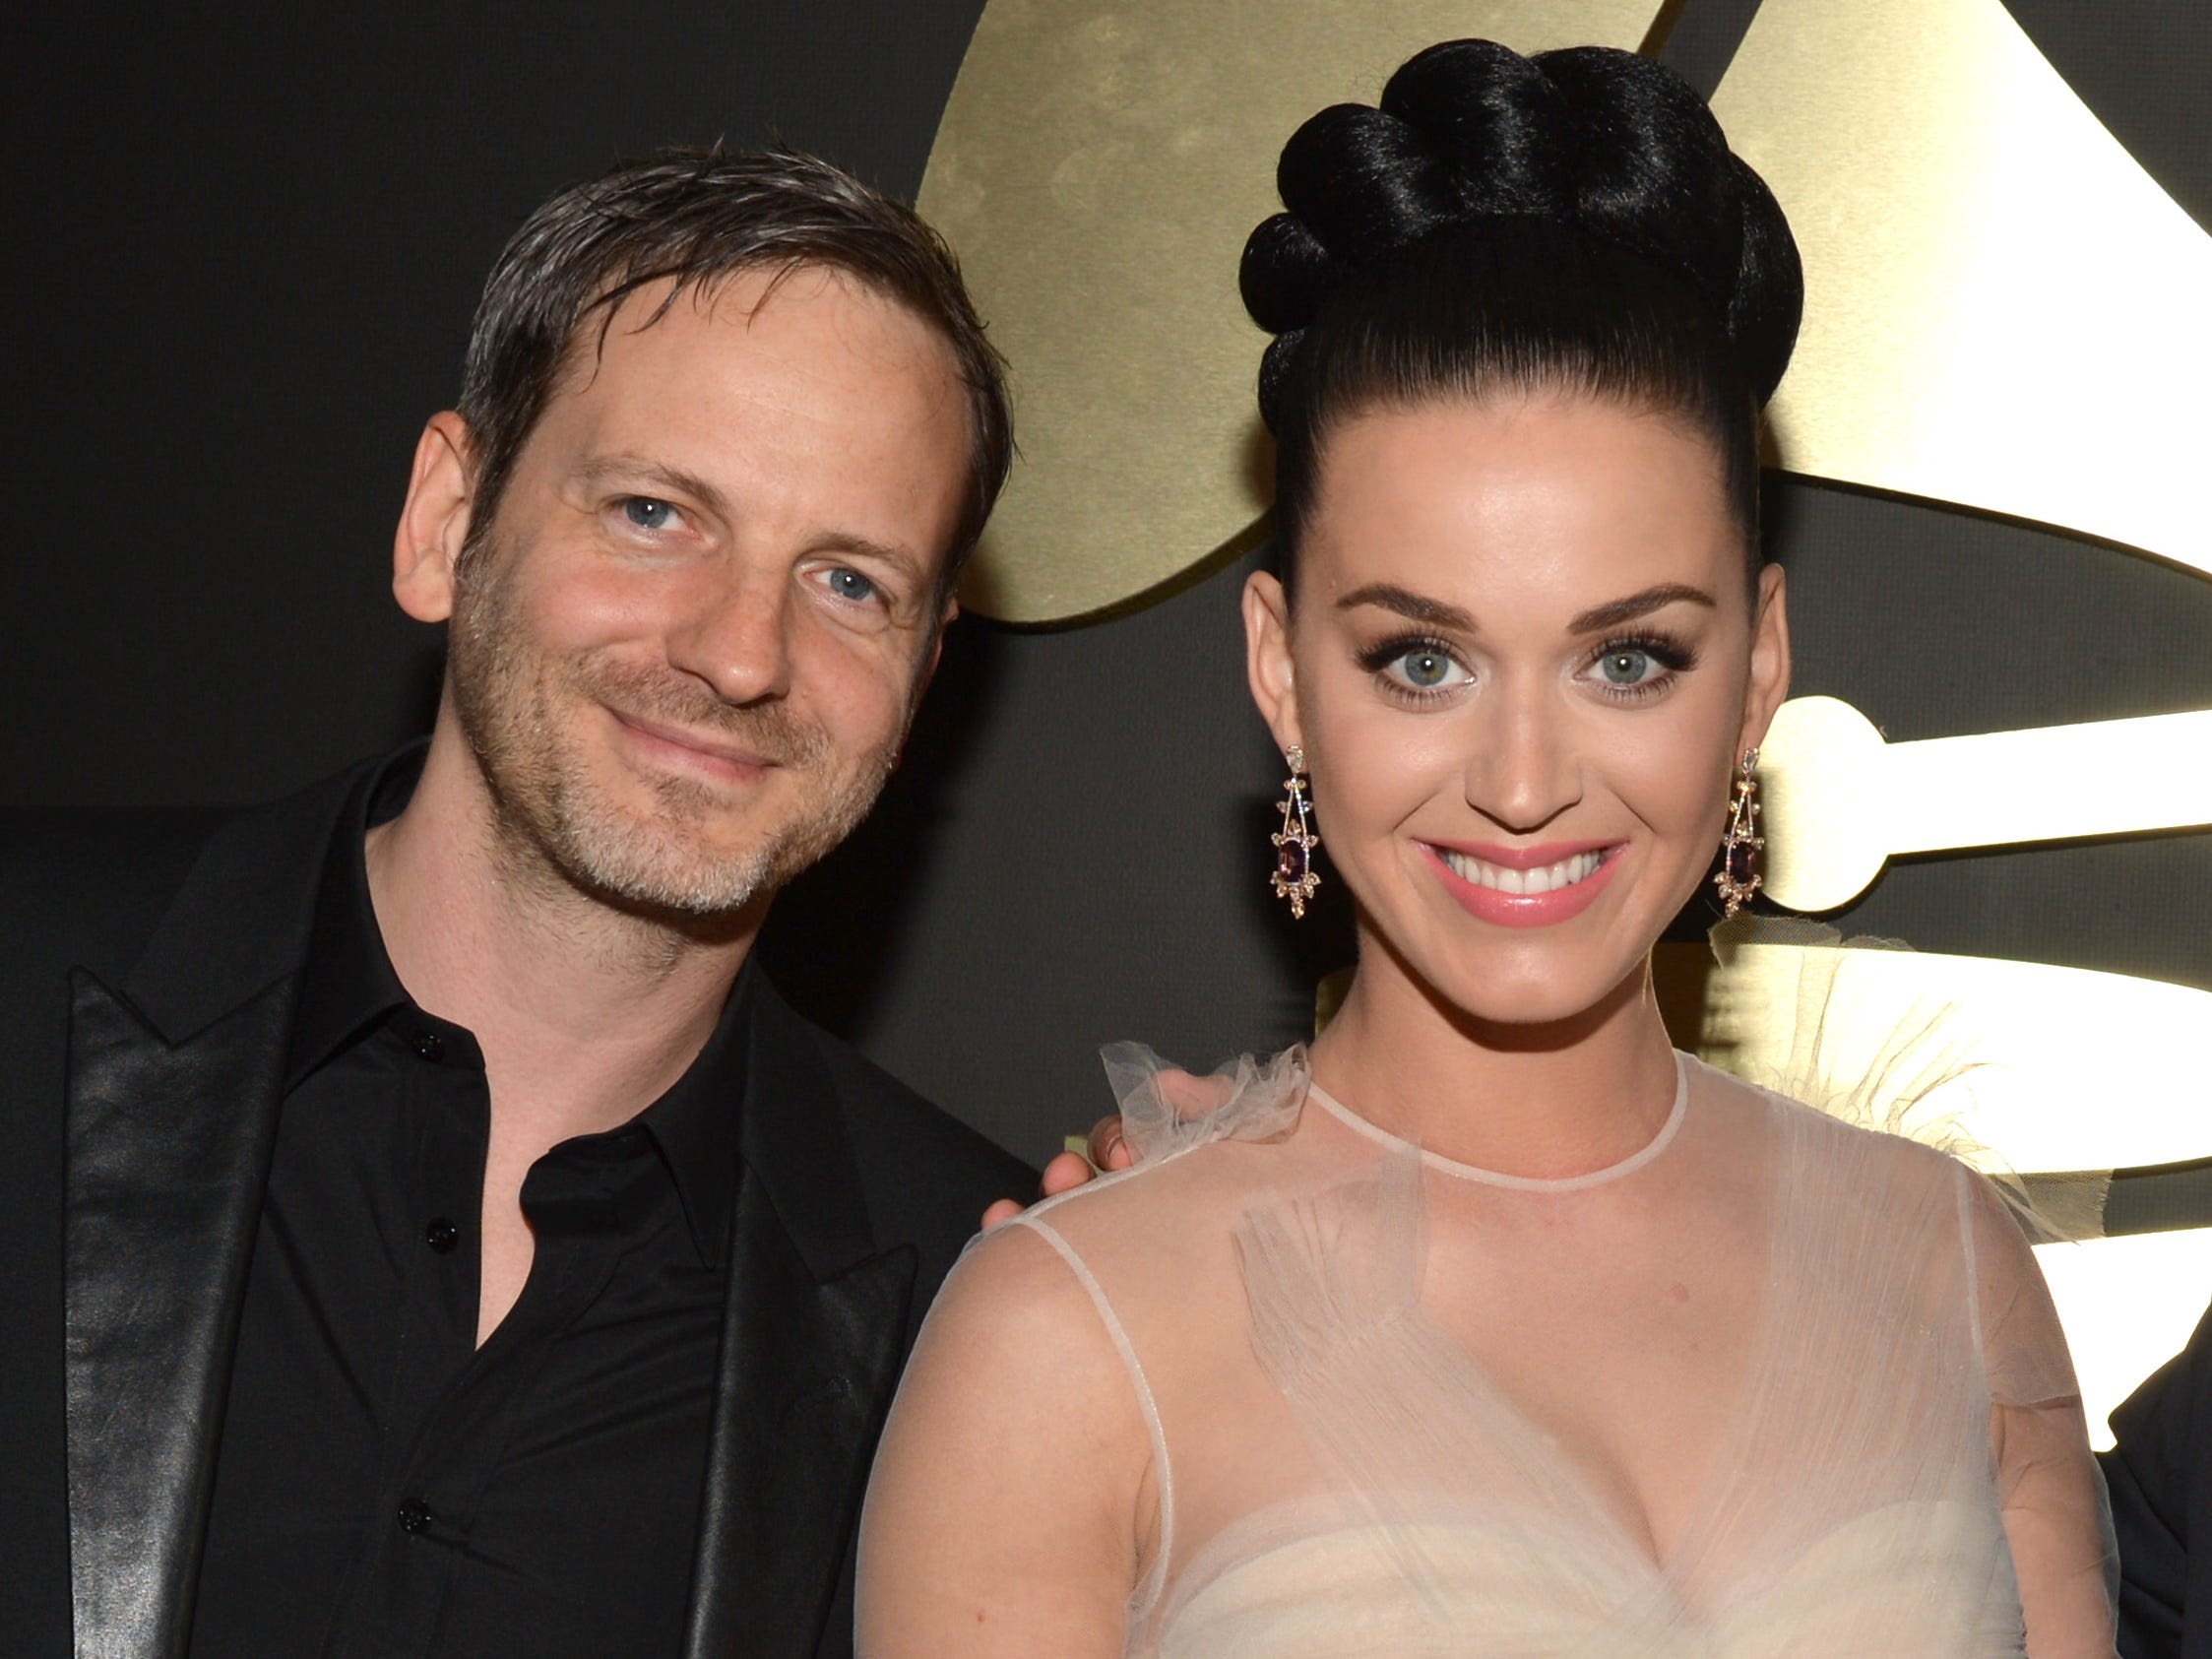 Katy Perry worked with Dr. Luke on her new album, despite Kesha's allegations of sexual abuse